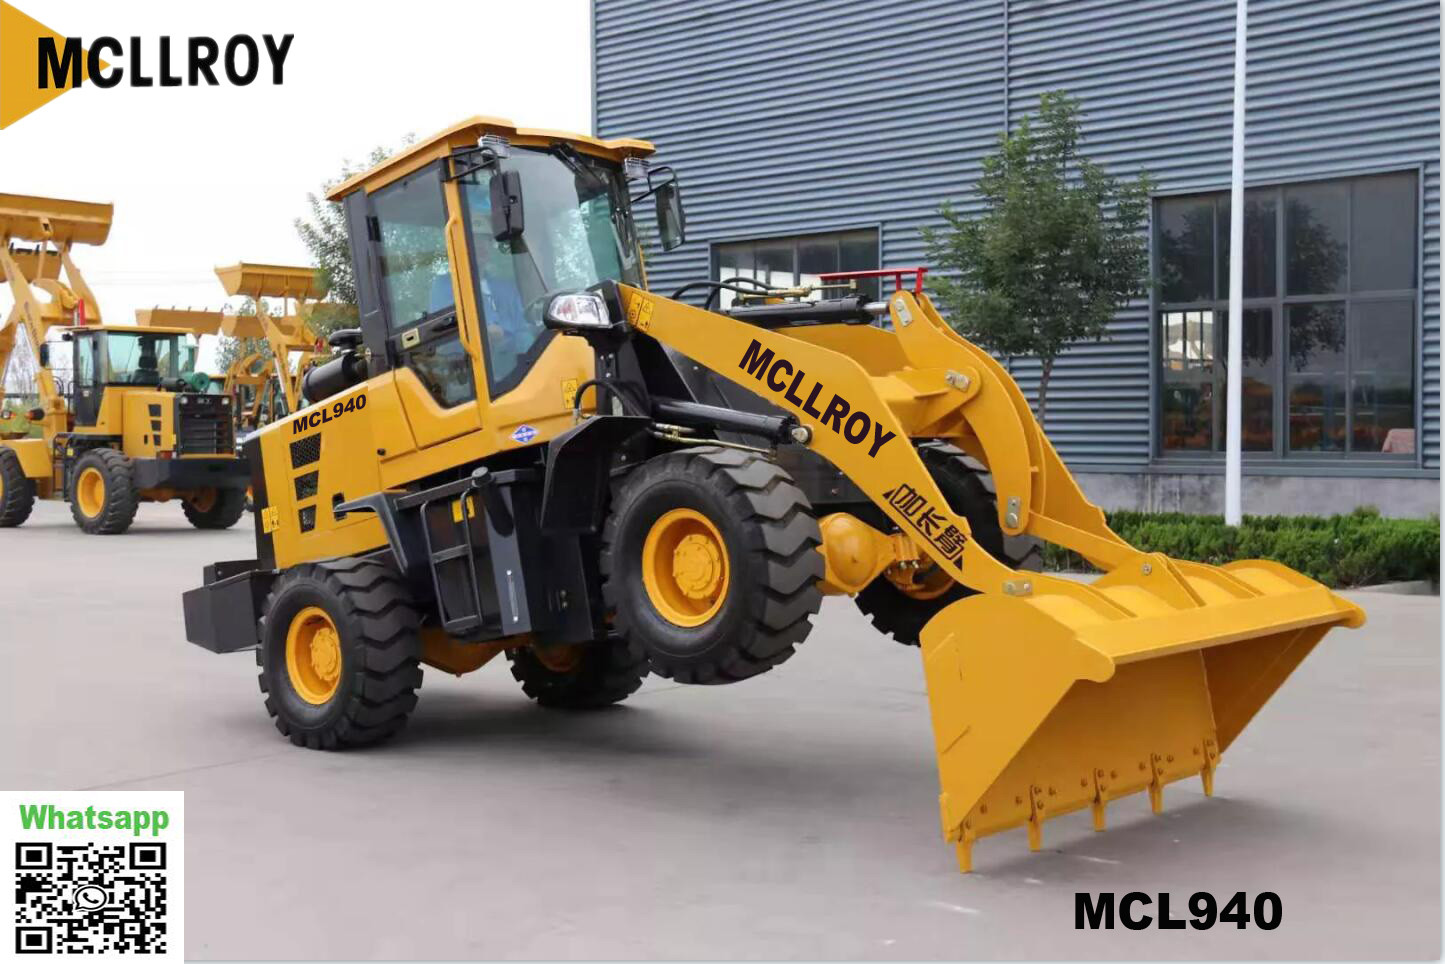  MCL940 ZL940 Front Wheel End Loader YN4102 Supercharged 76kw 2400rpm Hydraulic Manufactures